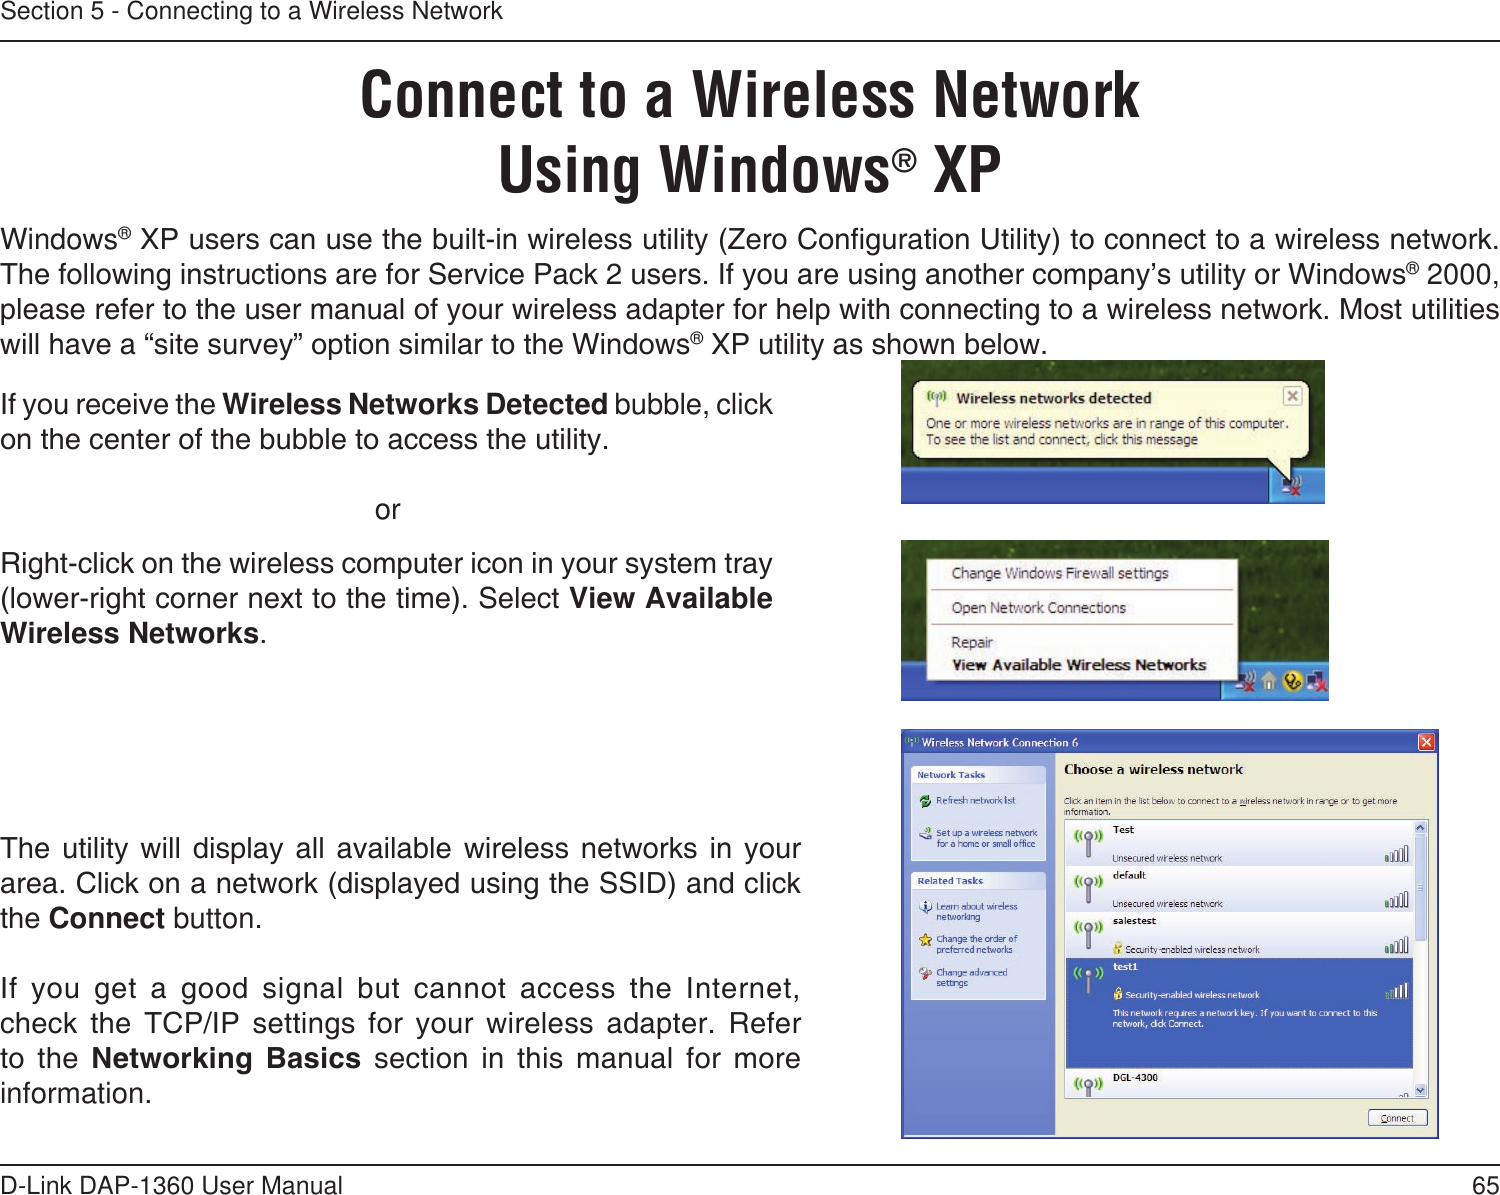 65D-Link DAP-1360 User ManualSection 5 - Connecting to a Wireless NetworkConnect to a Wireless NetworkUsing Windows® XPWindows® XP users can use the built-in wireless utility (Zero Conguration Utility) to connect to a wireless network. The following instructions are for Service Pack 2 users. If you are using another company’s utility or Windows® 2000, please refer to the user manual of your wireless adapter for help with connecting to a wireless network. Most utilities will have a “site survey” option similar to the Windows® XP utility as shown below.Right-click on the wireless computer icon in your system tray (lower-right corner next to the time). Select View Available Wireless Networks.If you receive the Wireless Networks Detected bubble, click on the center of the bubble to access the utility.     orThe  utility  will  display  all  available  wireless  networks  in  your area. Click on a network (displayed using the SSID) and click the Connect button.If  you  get  a  good  signal  but  cannot  access  the  Internet, check  the  TCP/IP  settings  for  your  wireless  adapter.  Refer to  the  Networking  Basics  section  in  this  manual  for  more information.